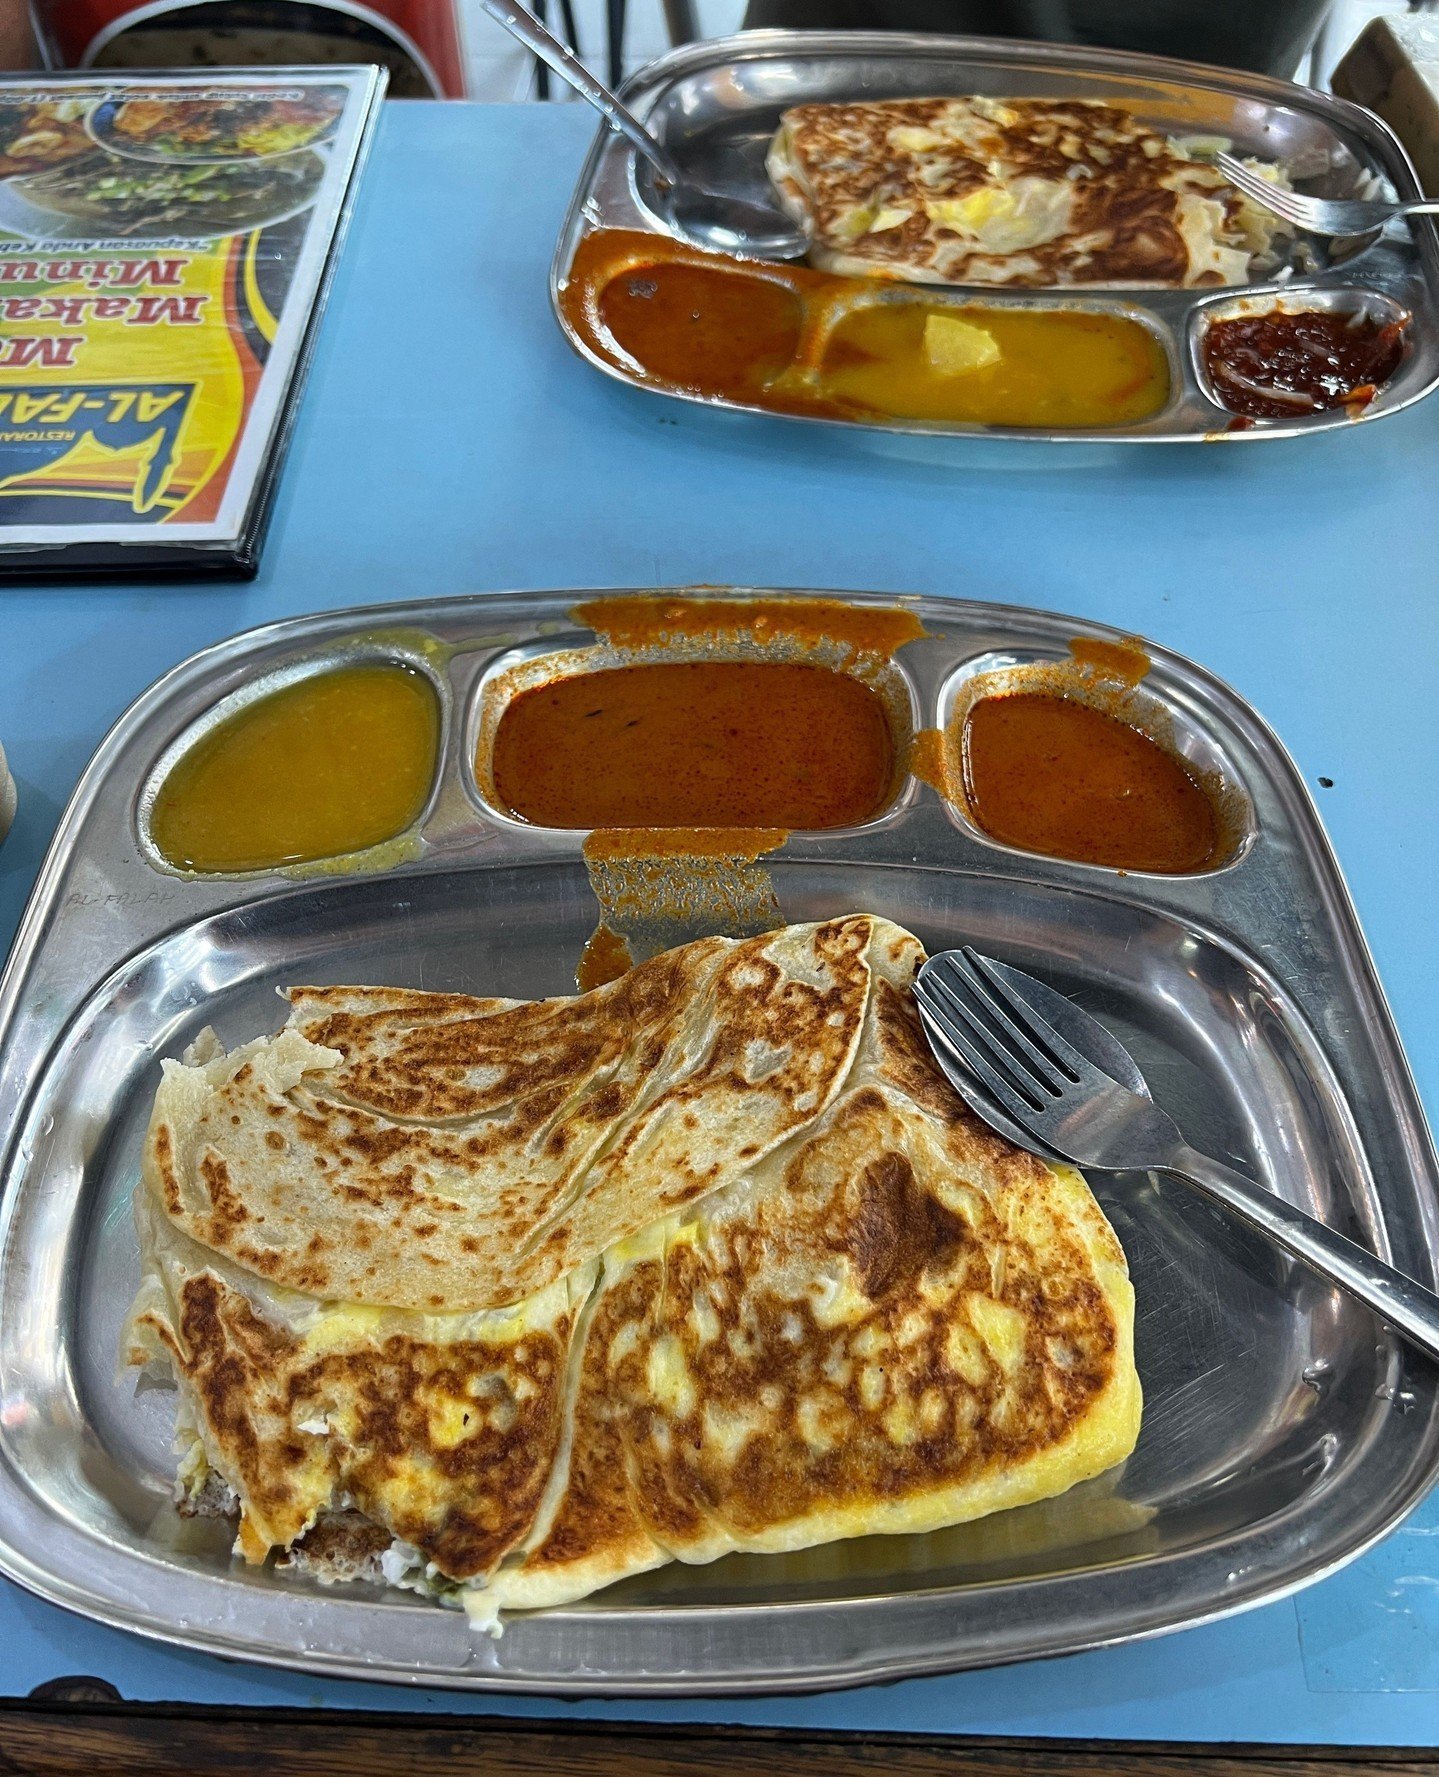 Honestly, I miss this the most from Malaysia. NZ needs to figure out Roti for breakfast ASAP. ⁠
⁠
Whenever there wasn't a mamak close enough a grab bike would drop off a stack of 'em for so cheap! My Malaysian friends would be shocked if they saw how